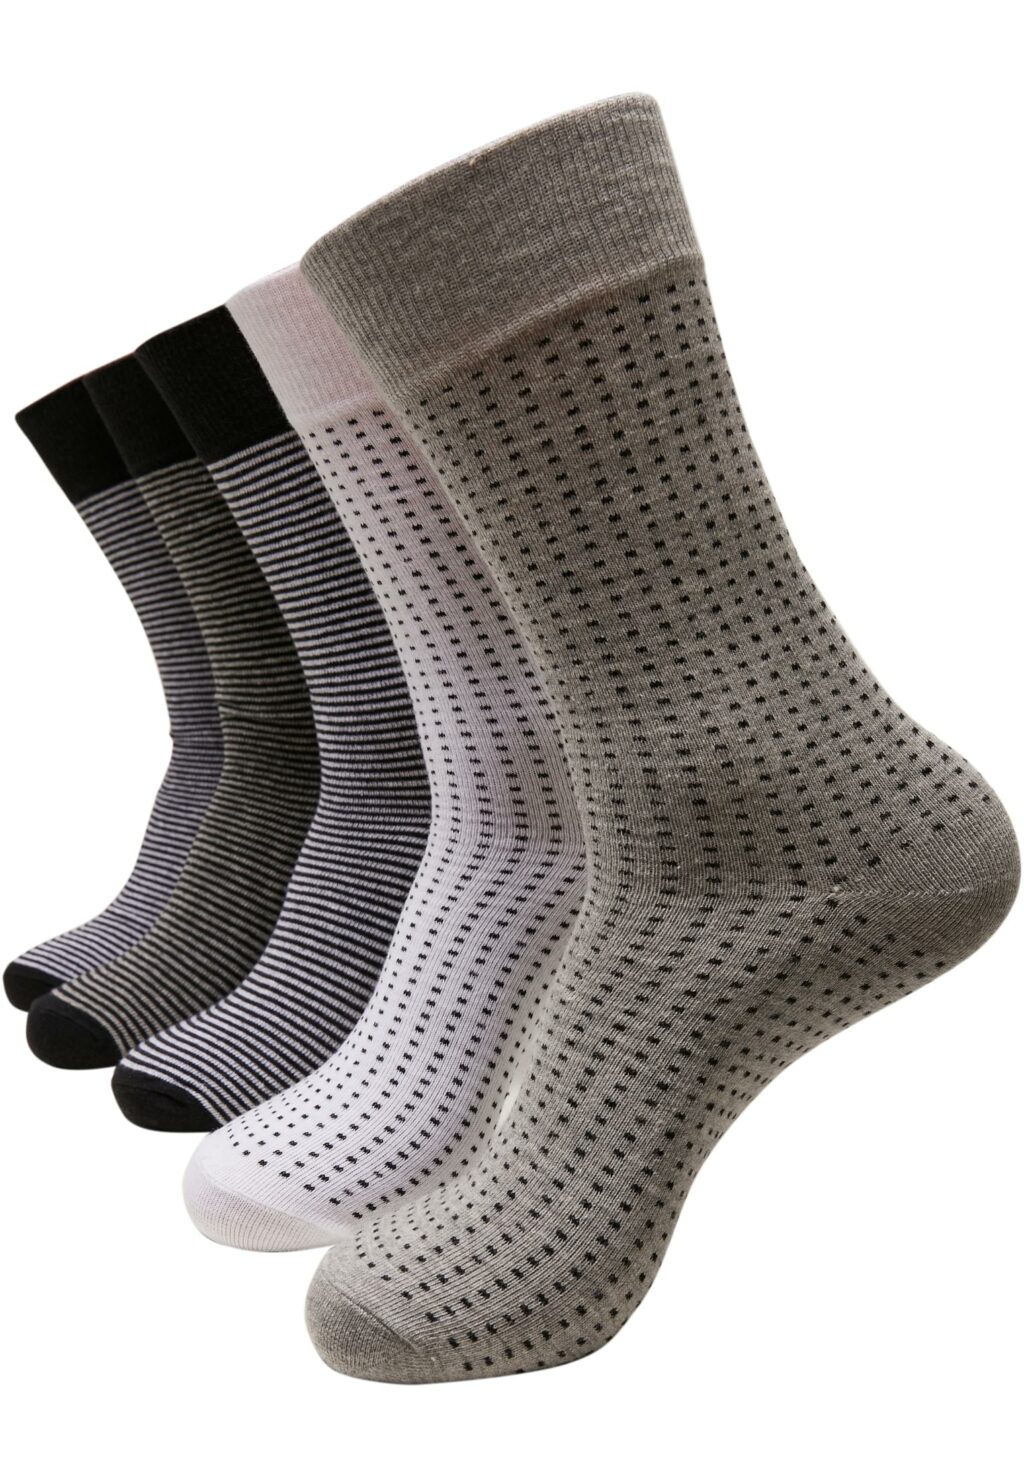 Stripes and Dots Socks 5-Pack blk/h.grey/wht TB3744